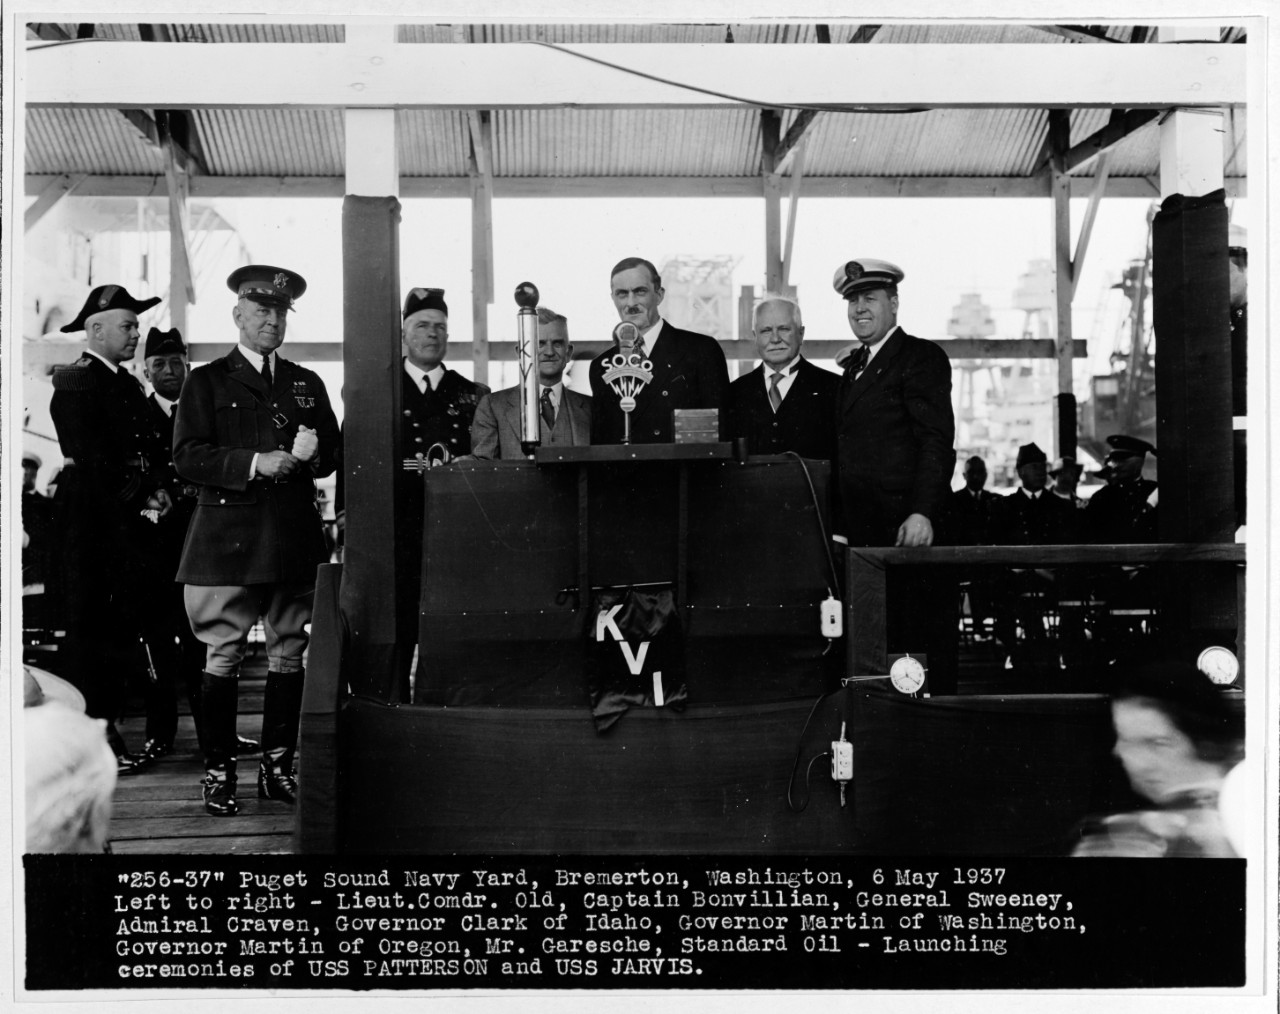 Dignitaries at launching ceremonies of USS PATTERSON (DD-392) and USS JARVIS (DD-393), May 6, 1937.